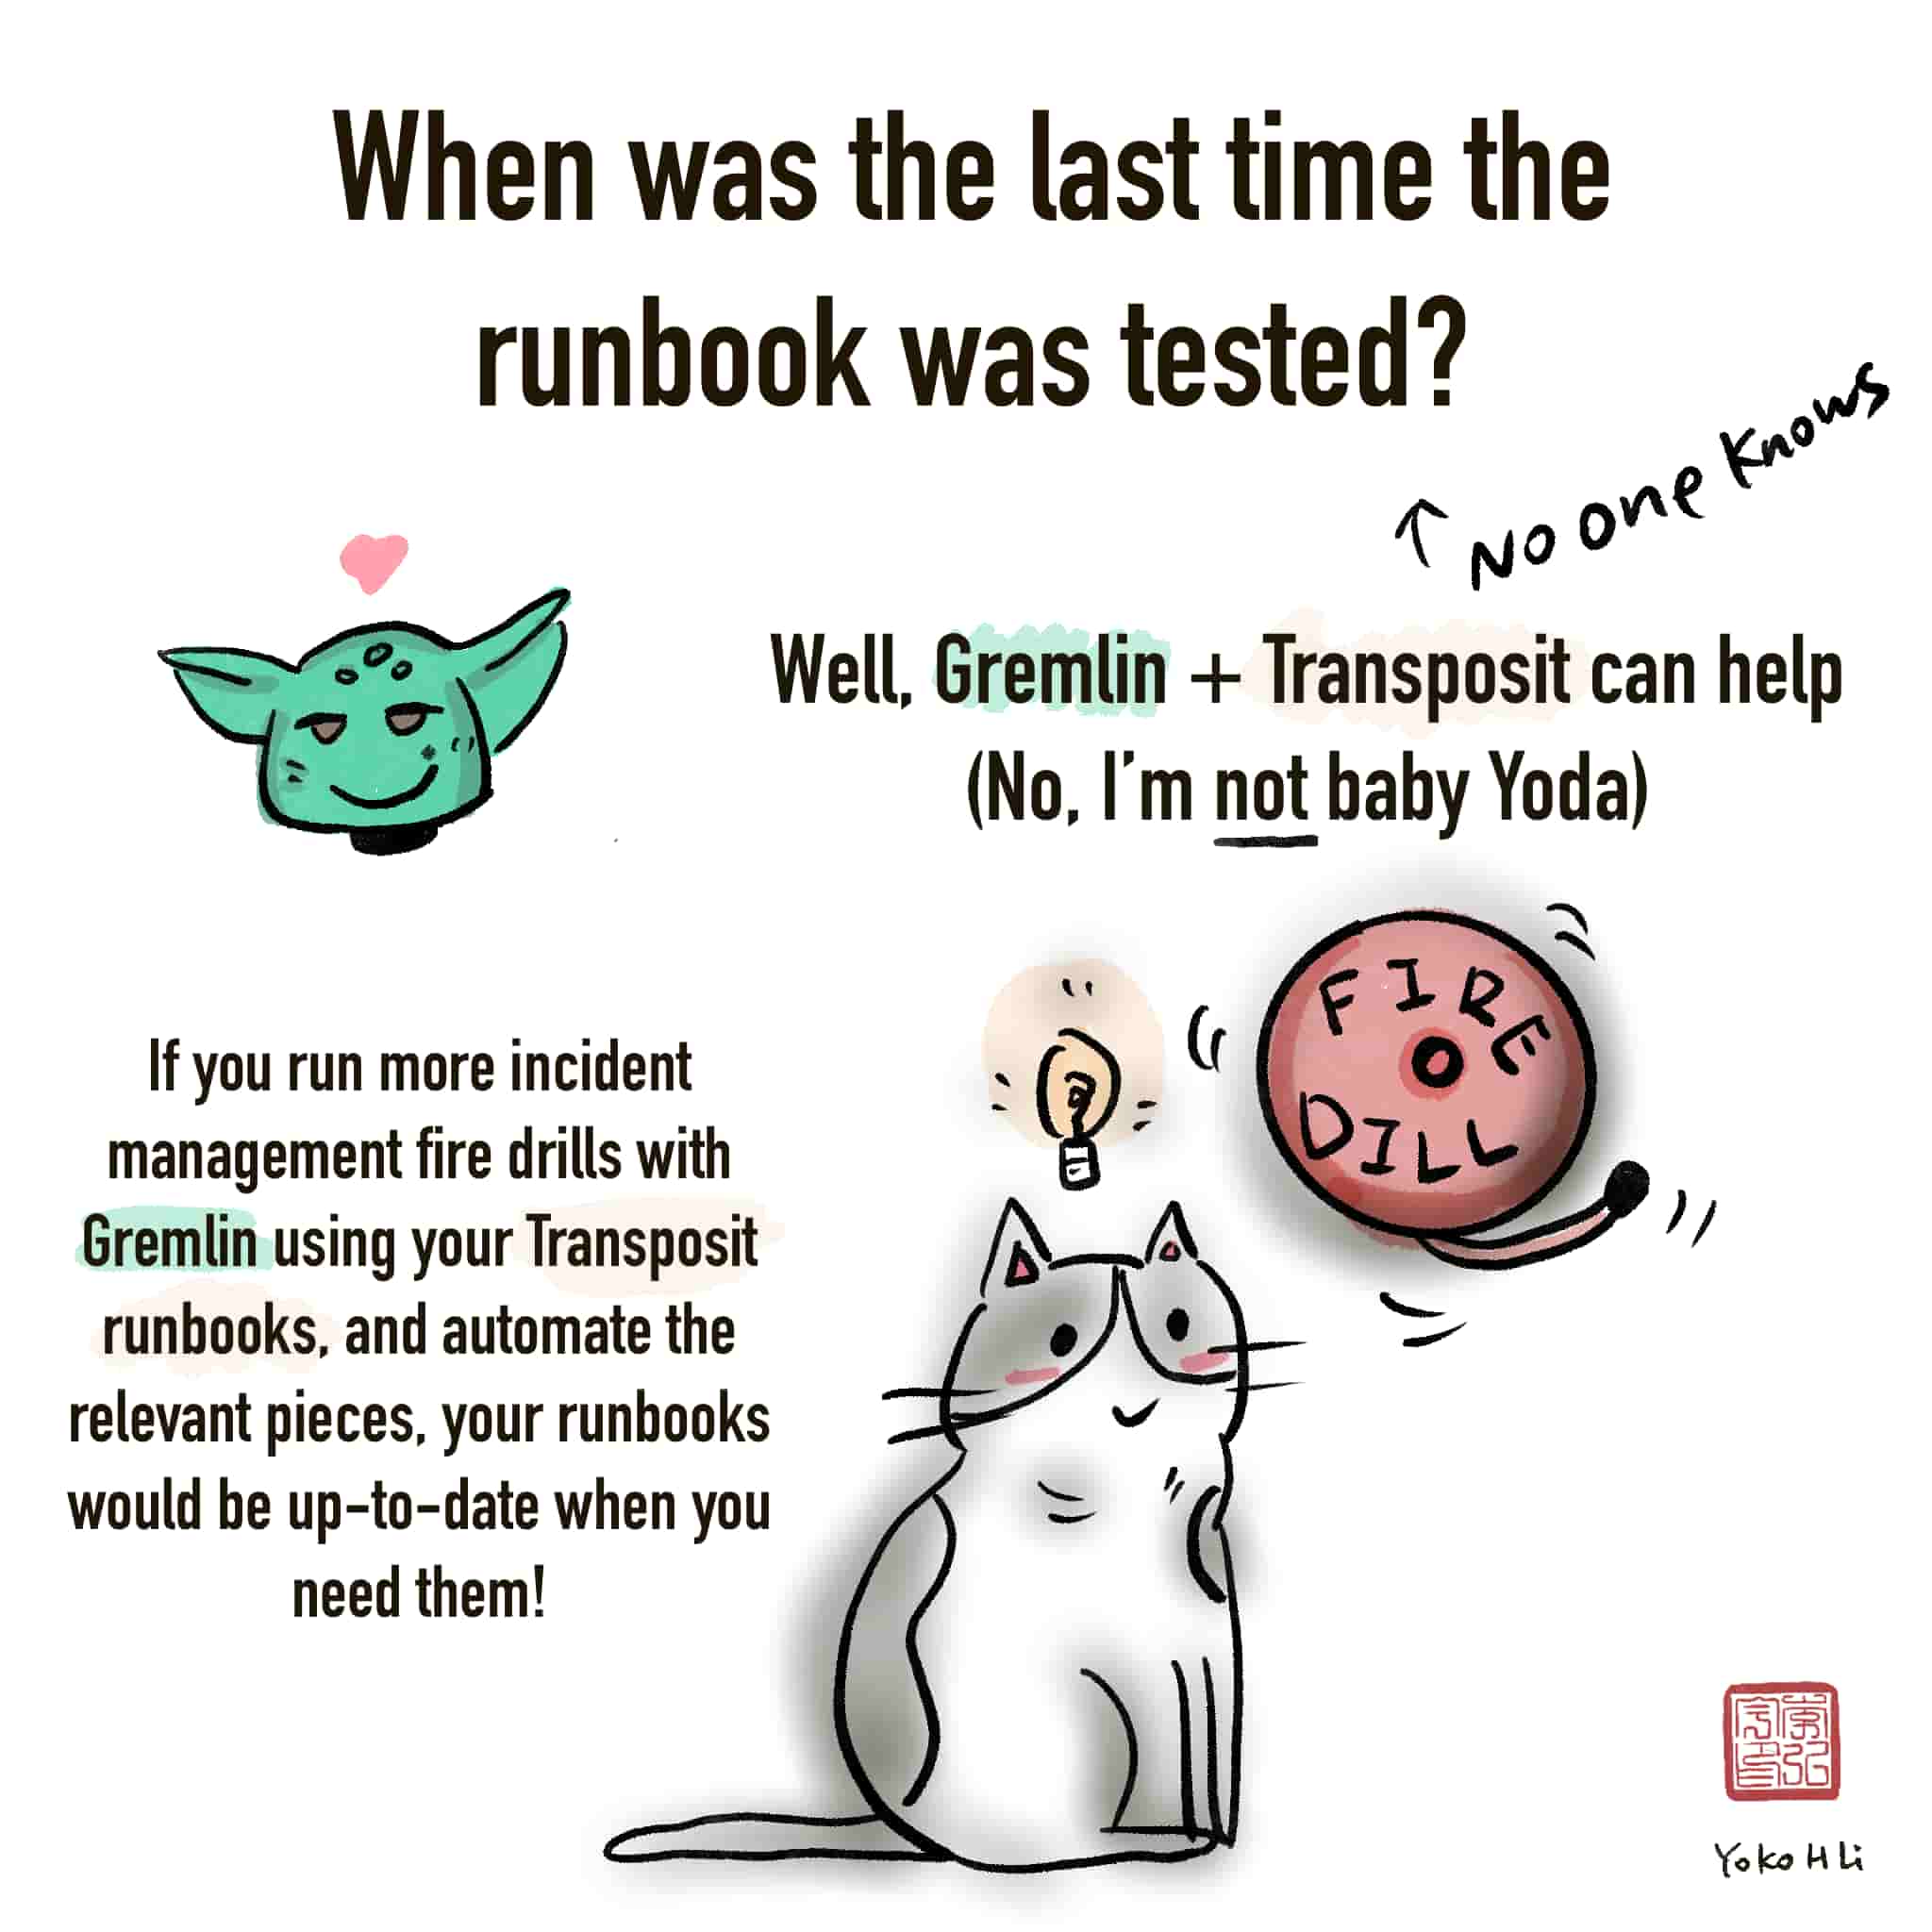 Comic: When was the last time the runbook was tested? (No one knows) Well, Gremlin + Transposit can help. If you run more incident management fire drills with Gremlin using your Transposit runbooks, and automate the relevant pieces, your runbooks would be up-to-date when you need them!